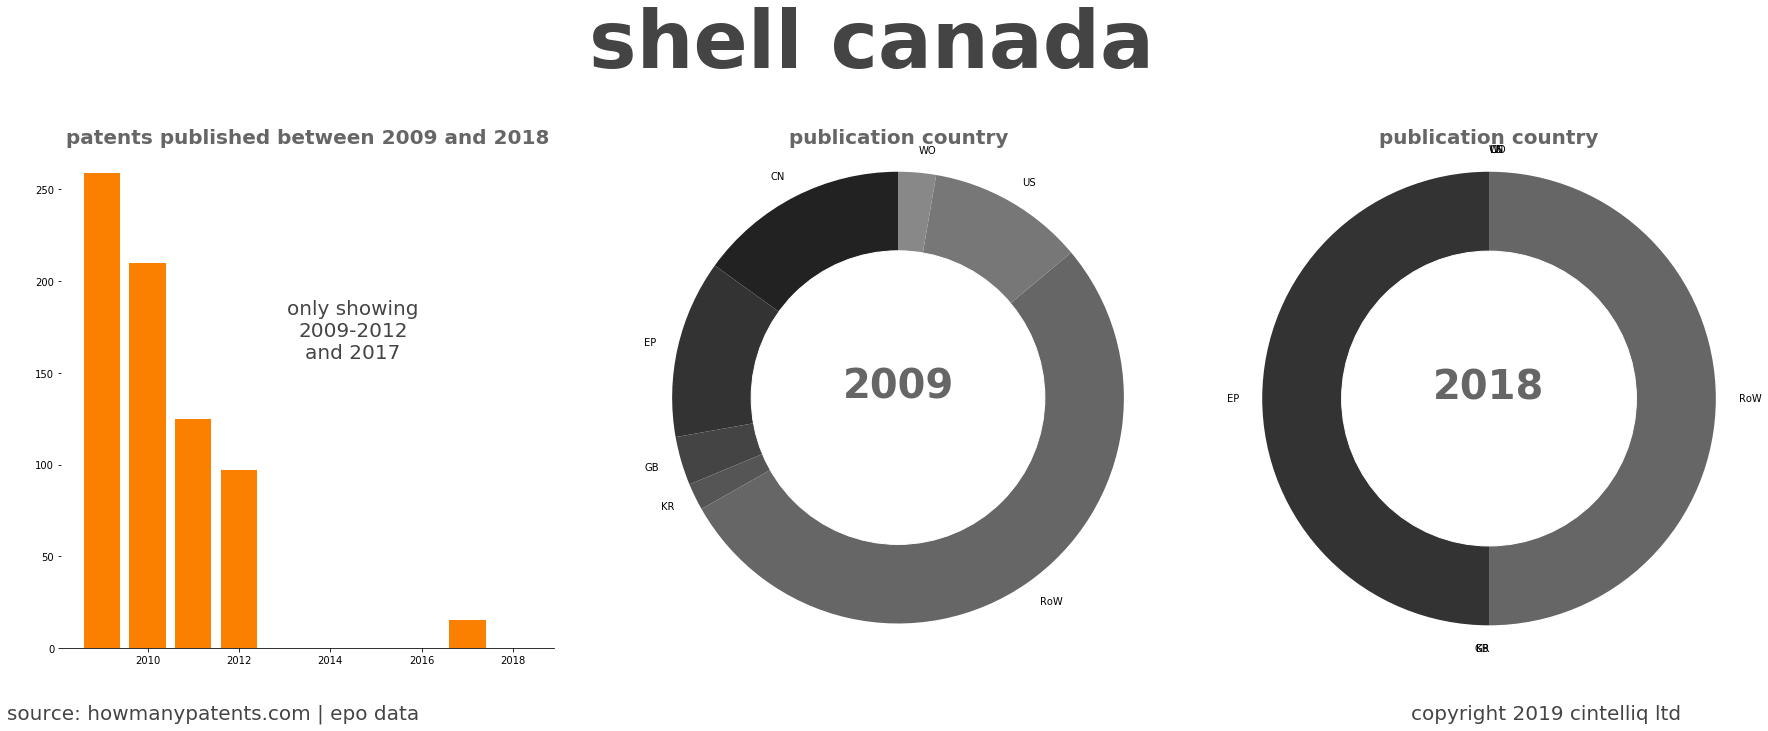 summary of patents for Shell Canada